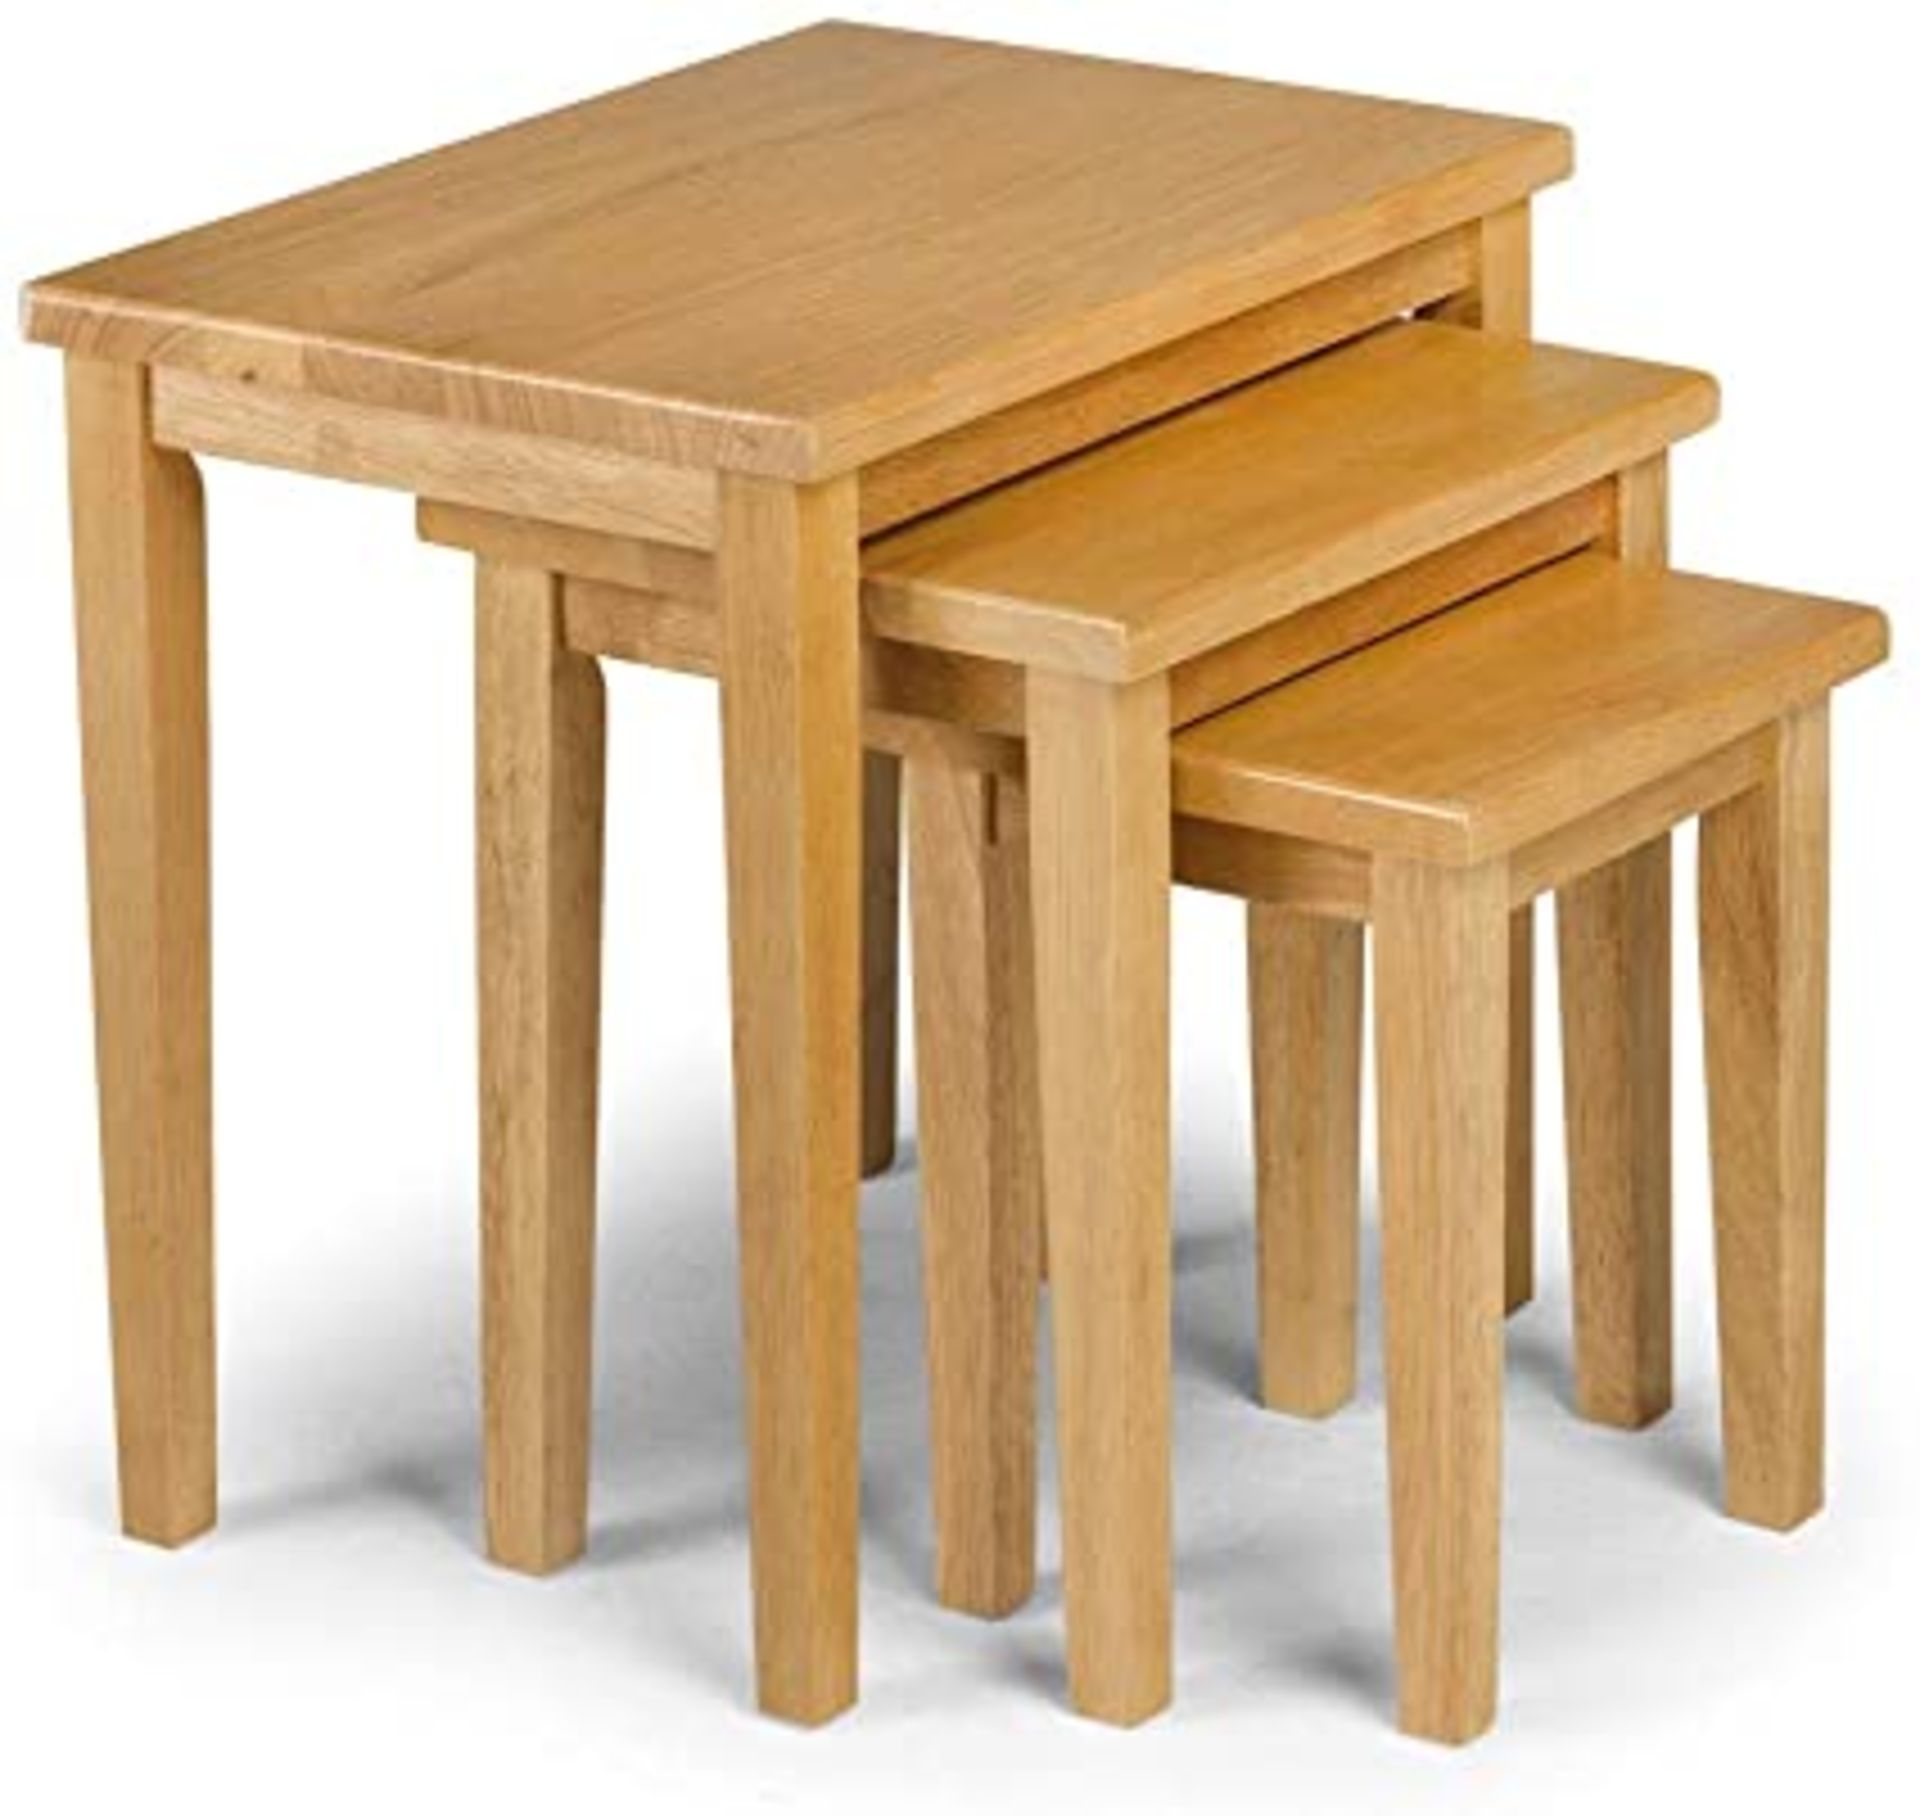 BOXED CLEO NEST OF TABLES NATURAL OAK RRP £139.00 (AS SEEN IN WAYFAIR)Condition ReportAppraisal